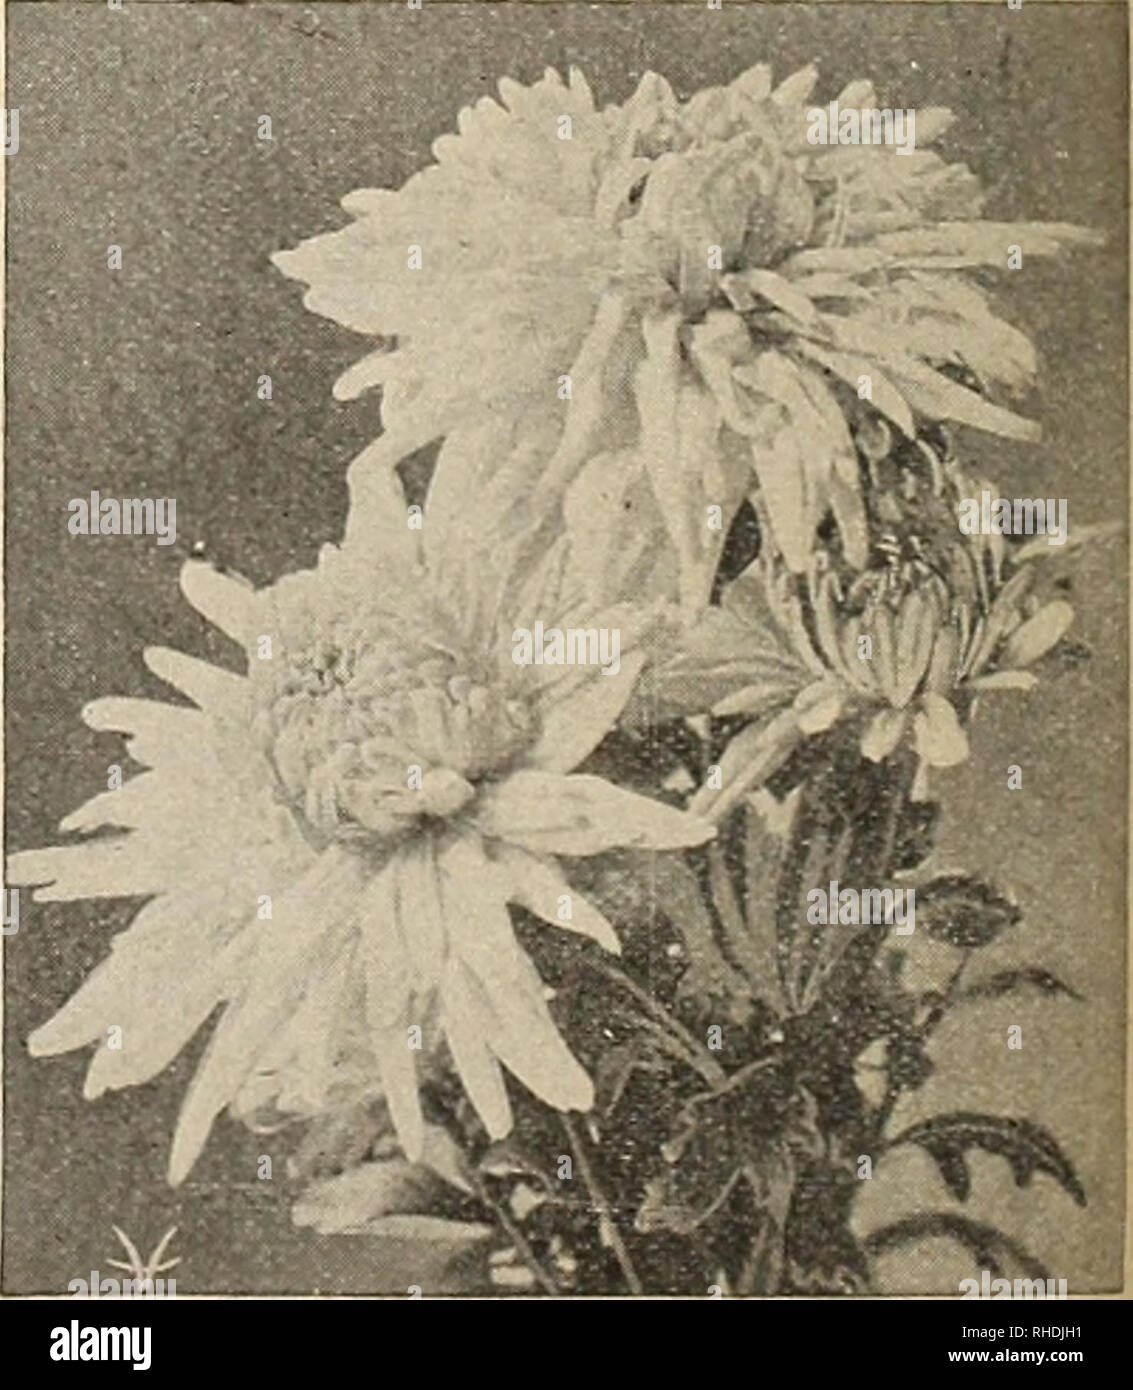 . Book for florists. Flowers Seeds Catalogs; Bulbs (Plants) Seedlings Catalogs; Vegetables Seeds Catalogs; Seeds Catalogs; Horticulture Equipment and supplies Catalogs. MRS. GREENING CHRYSANTHEMUMS—For Pot Culture We have found the following varieties to be among the best. Strong plants, from 2H inch pots. Those marked (*) are also good varieties for bench culture. Each Doz. 100 August Dasse. Golden-yellow $0.15 $0.85 $6.00 *Chieftain. A rose-pink, commercial variety of exceptional merit. Perfect stem and foliage 15 .85 6.00 *Edwin Seidewitz. A beautiful late incurved; bright pink .15 .85 6.00 Stock Photo